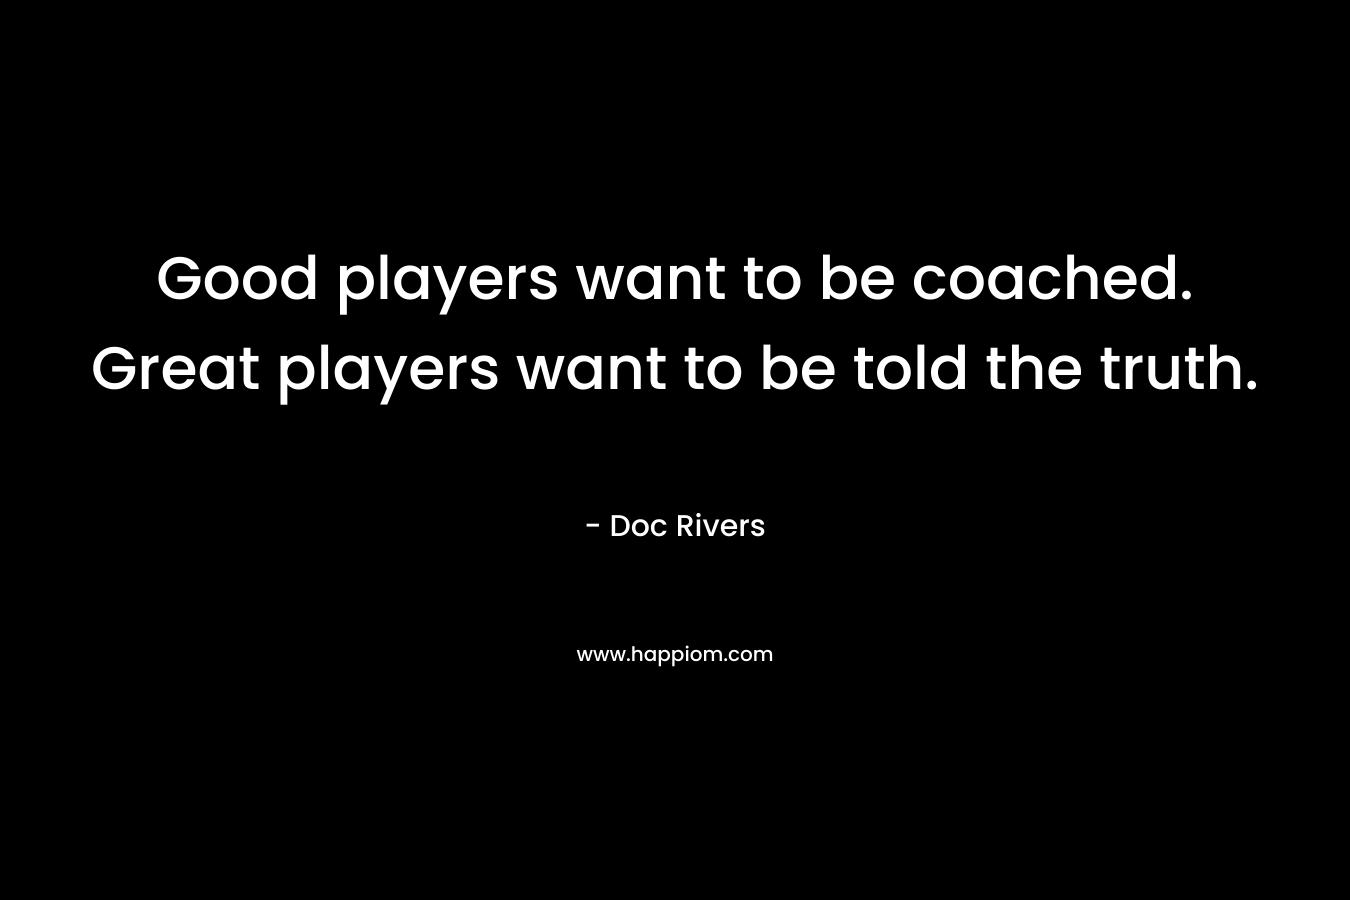 Good players want to be coached. Great players want to be told the truth. – Doc Rivers